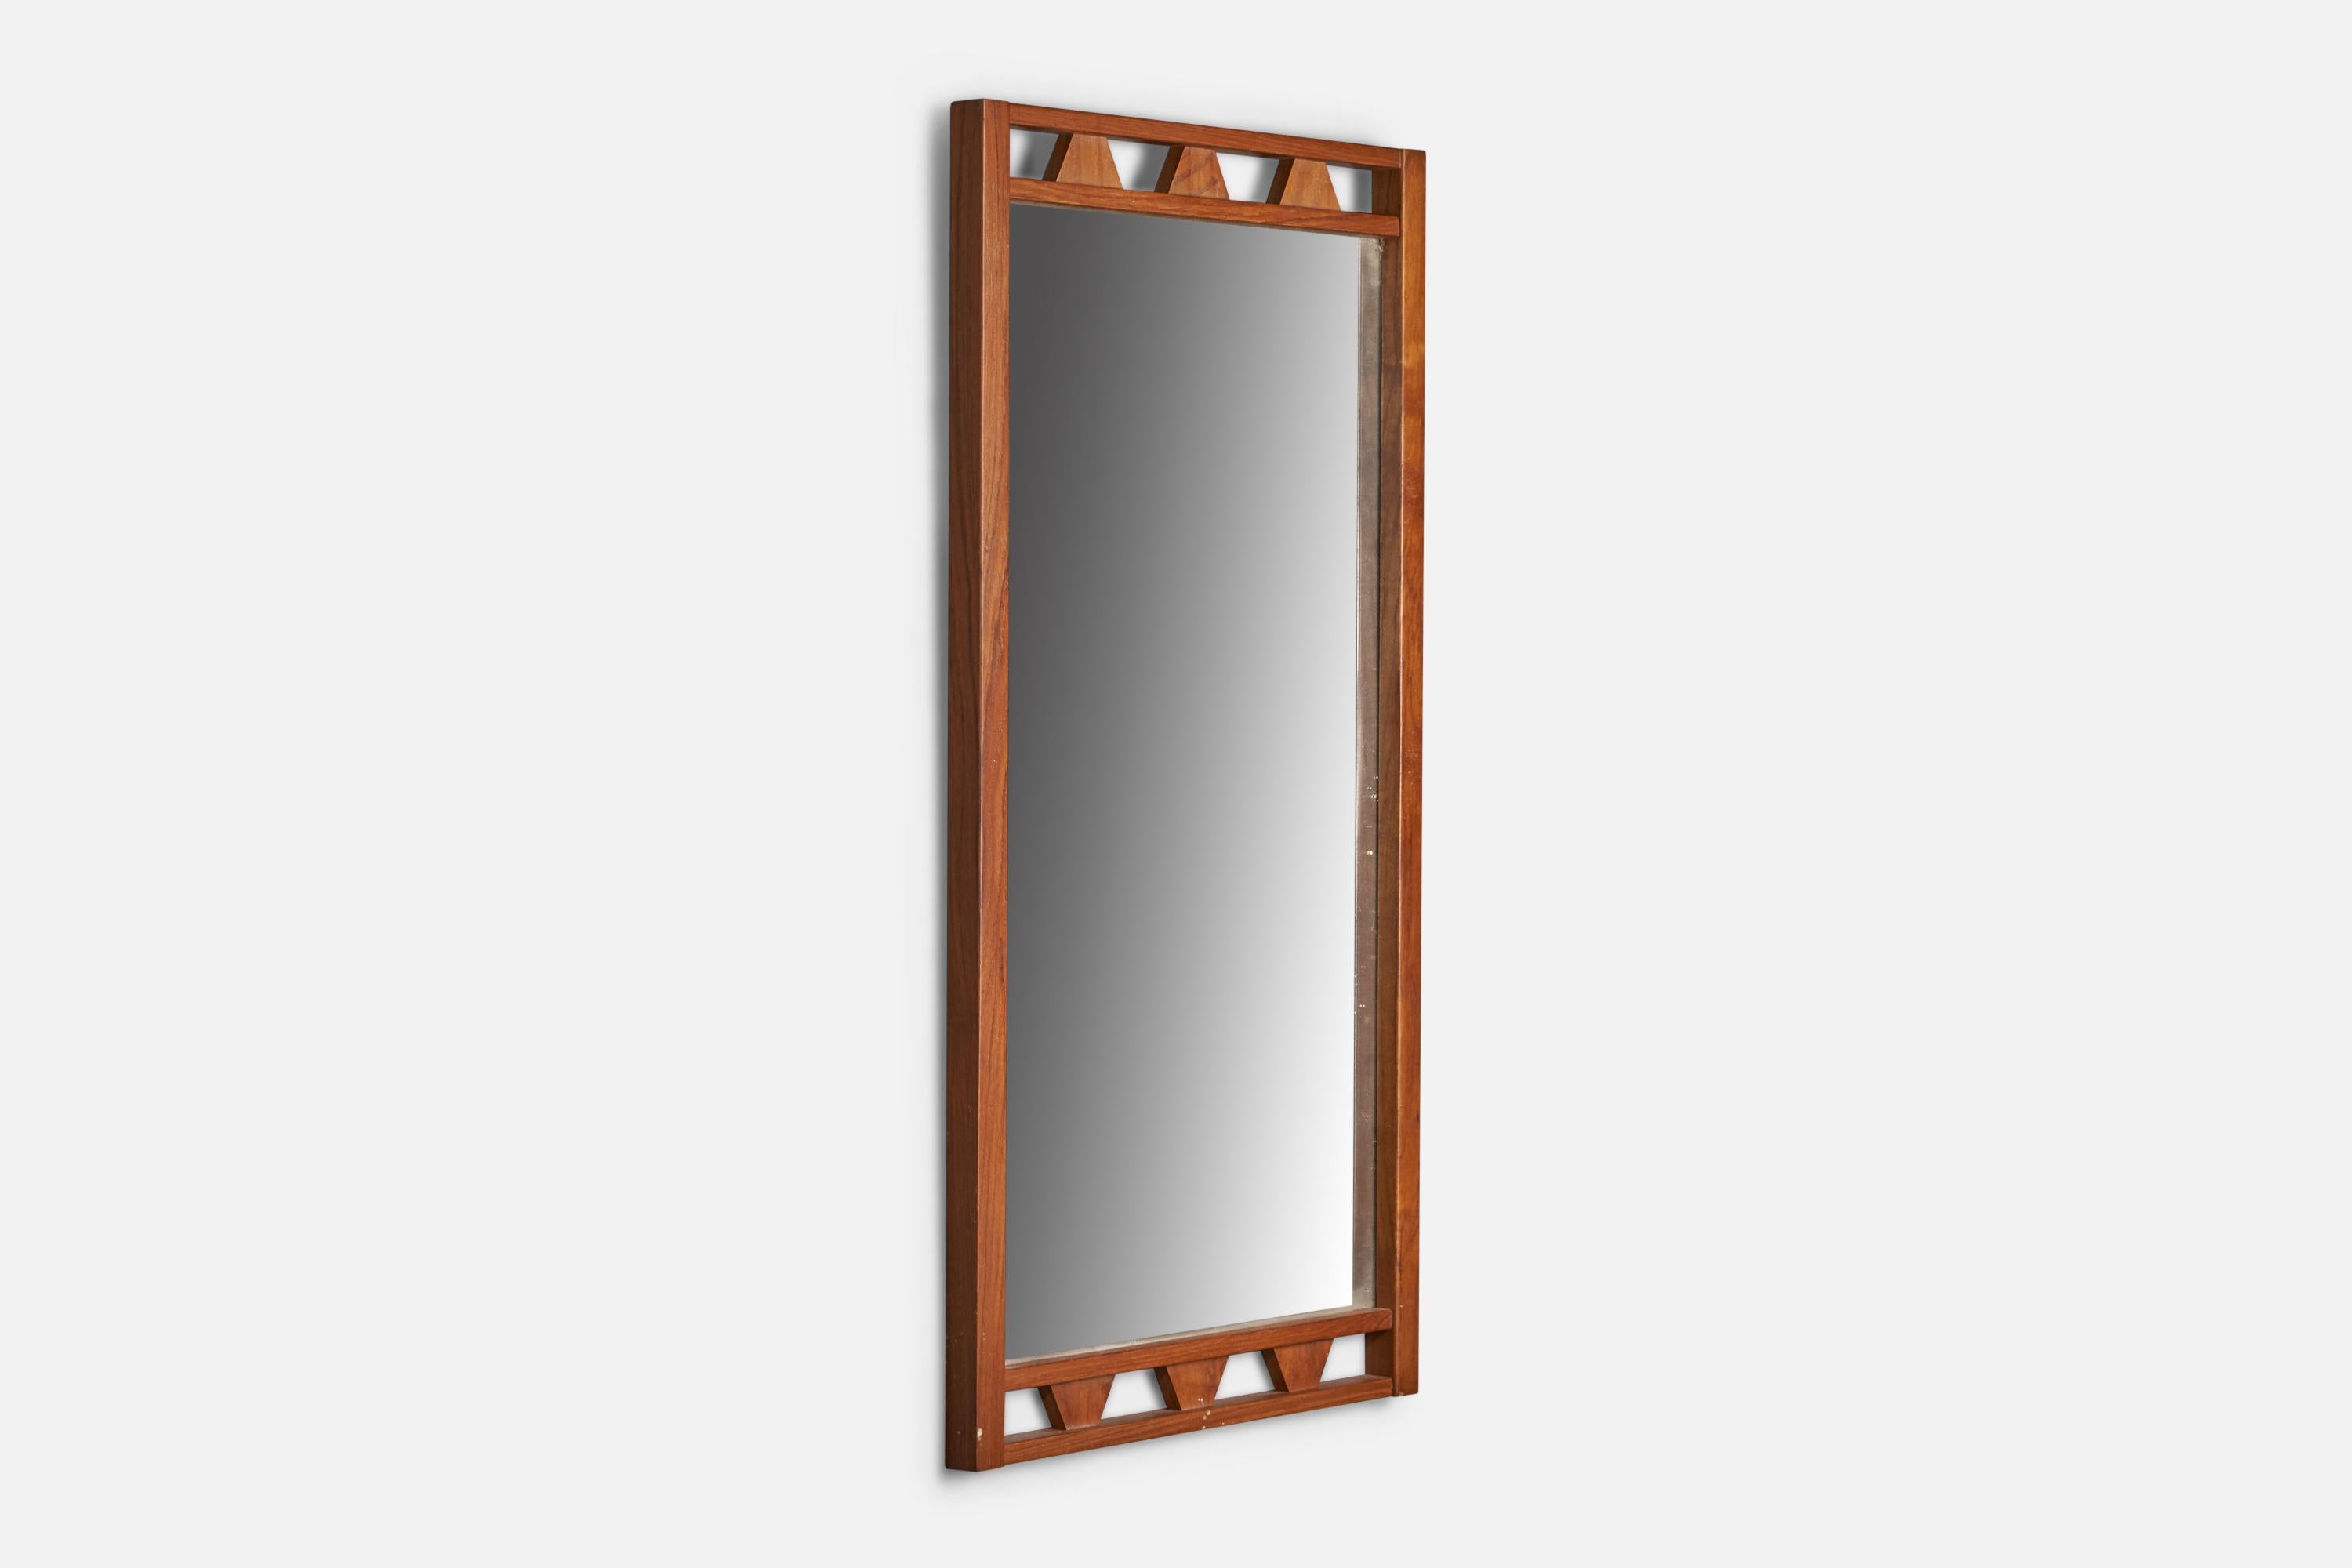 A teak wall mirror designed and produced in Sweden, 1950s.